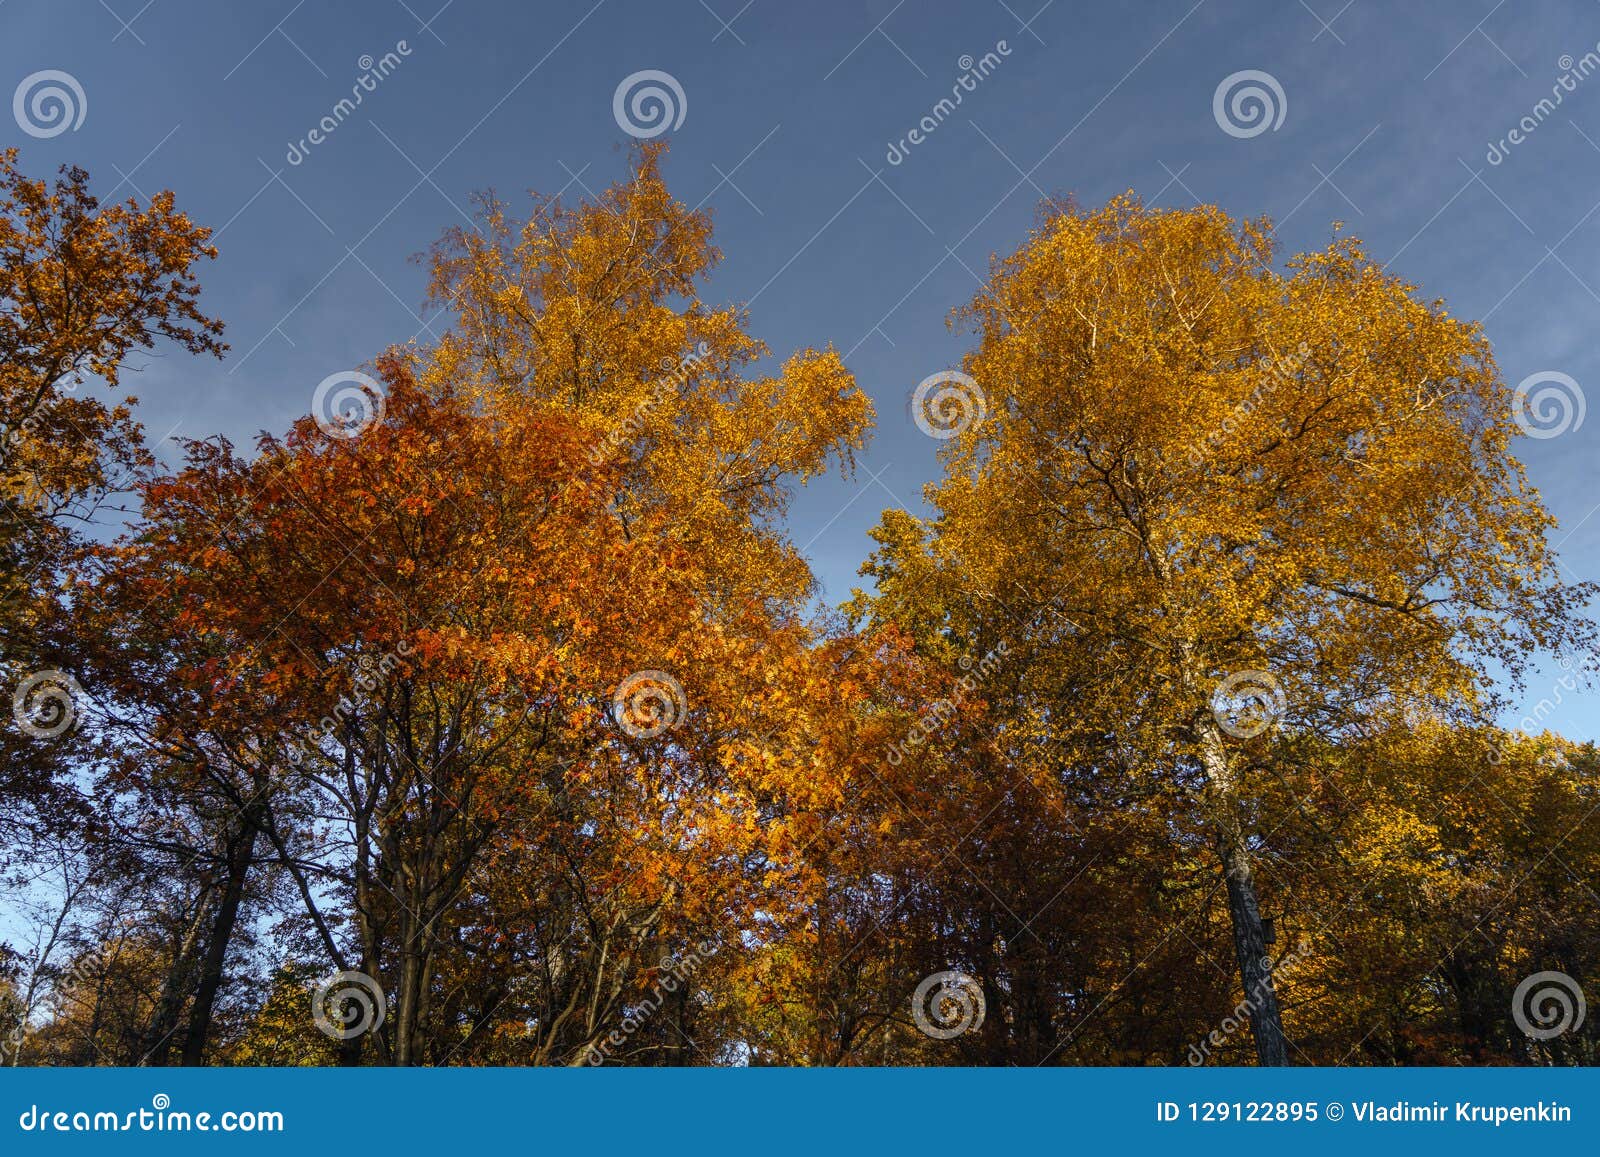 Fall in the Park stock image. Image of park, tourism - 129122895